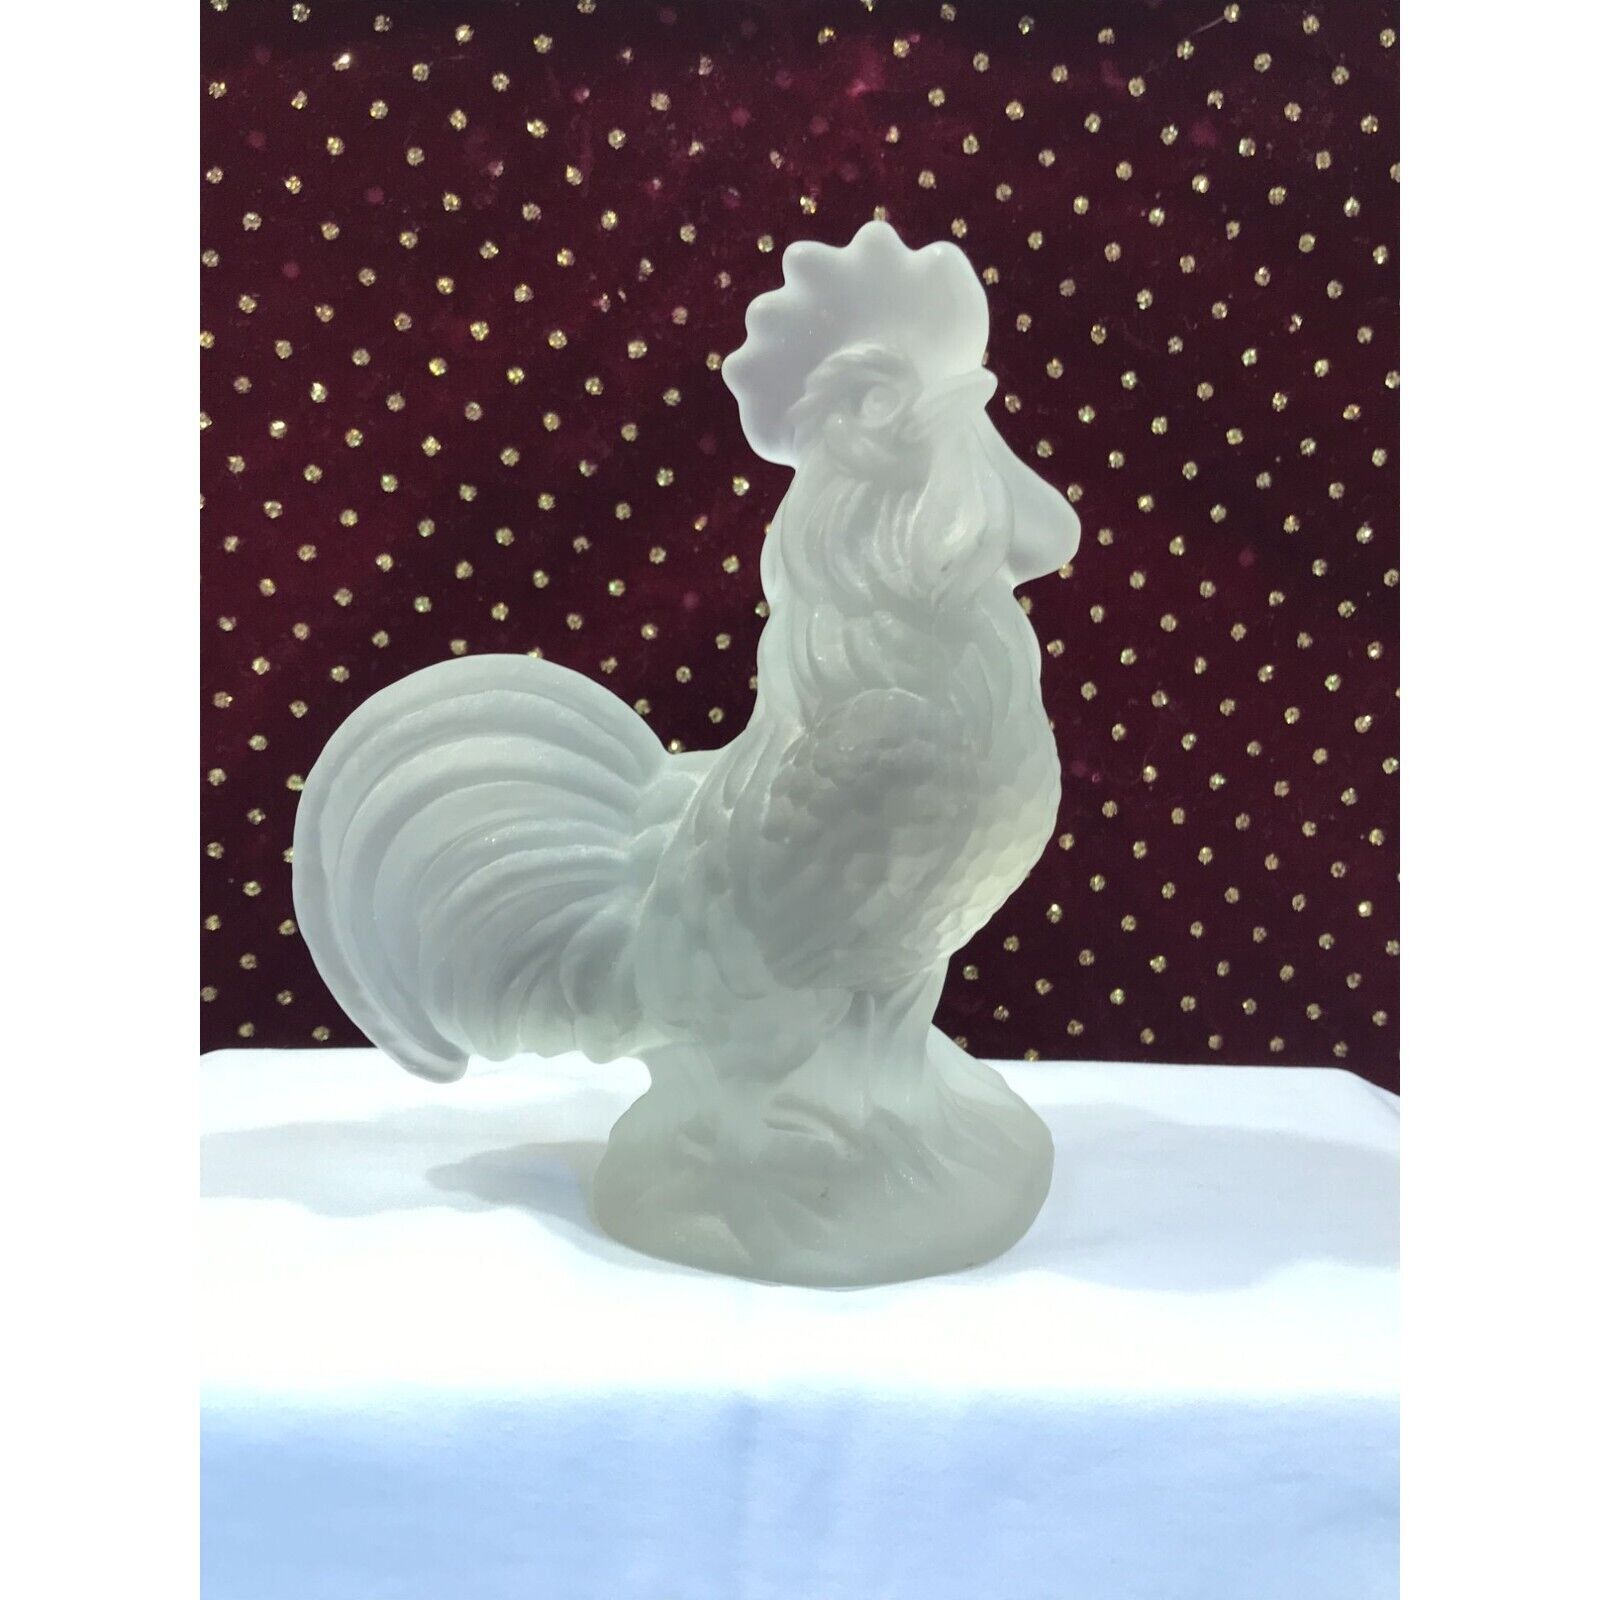 Vintage Goebel Germany 1978 frosted glass or crystal rooster, 5.5 in tall